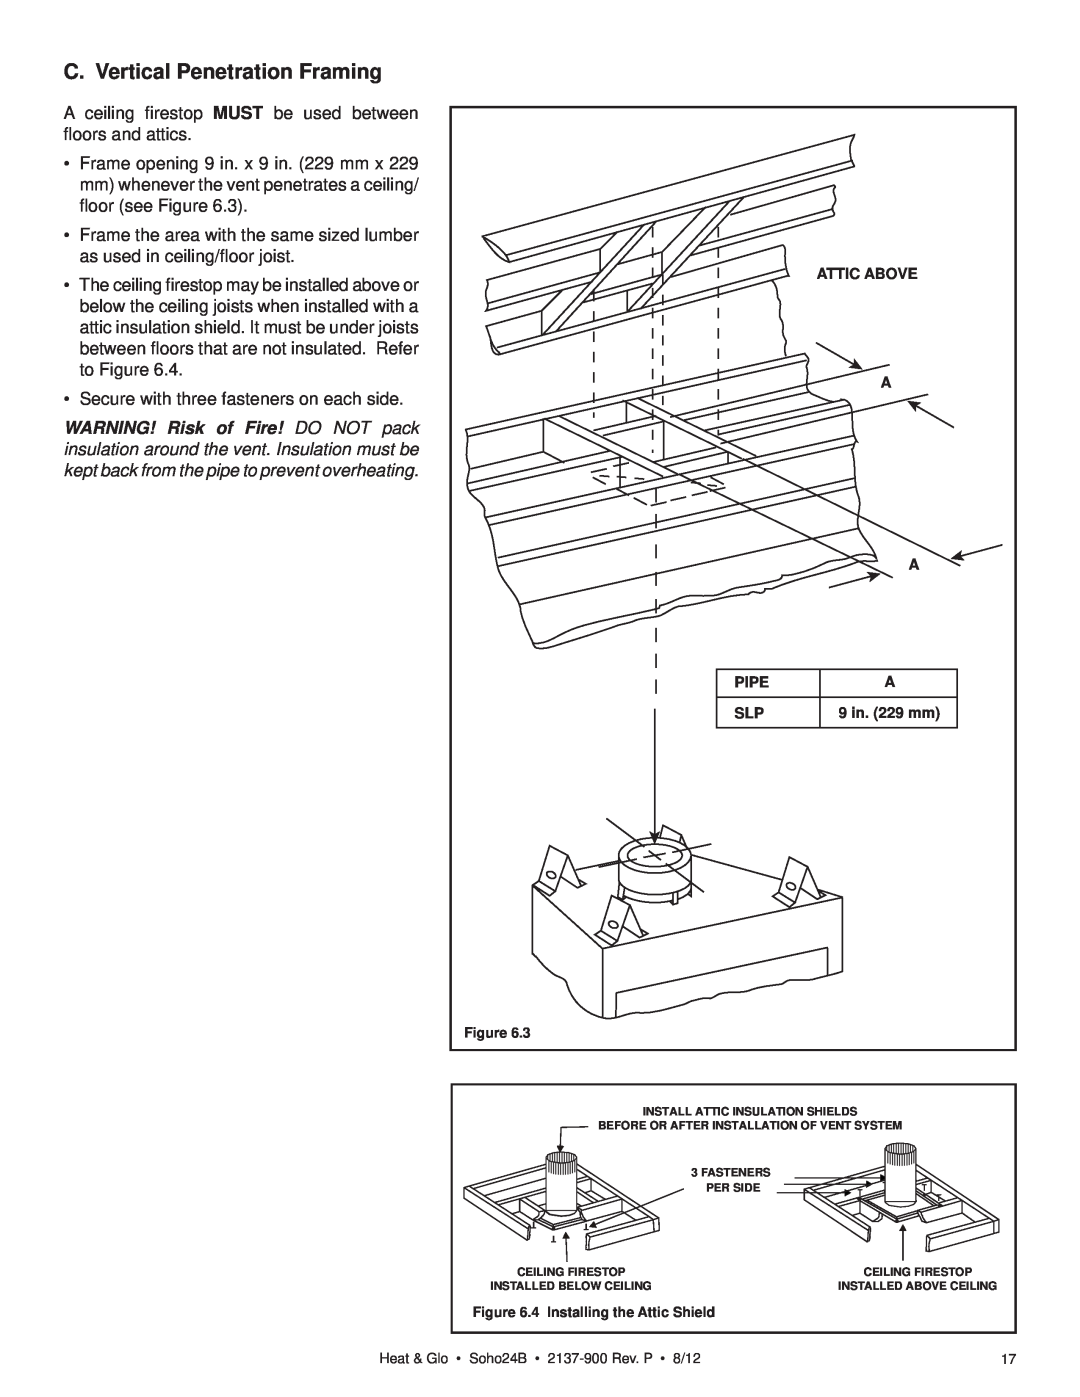 Heat & Glo LifeStyle 2137-900 owner manual C. Vertical Penetration Framing 